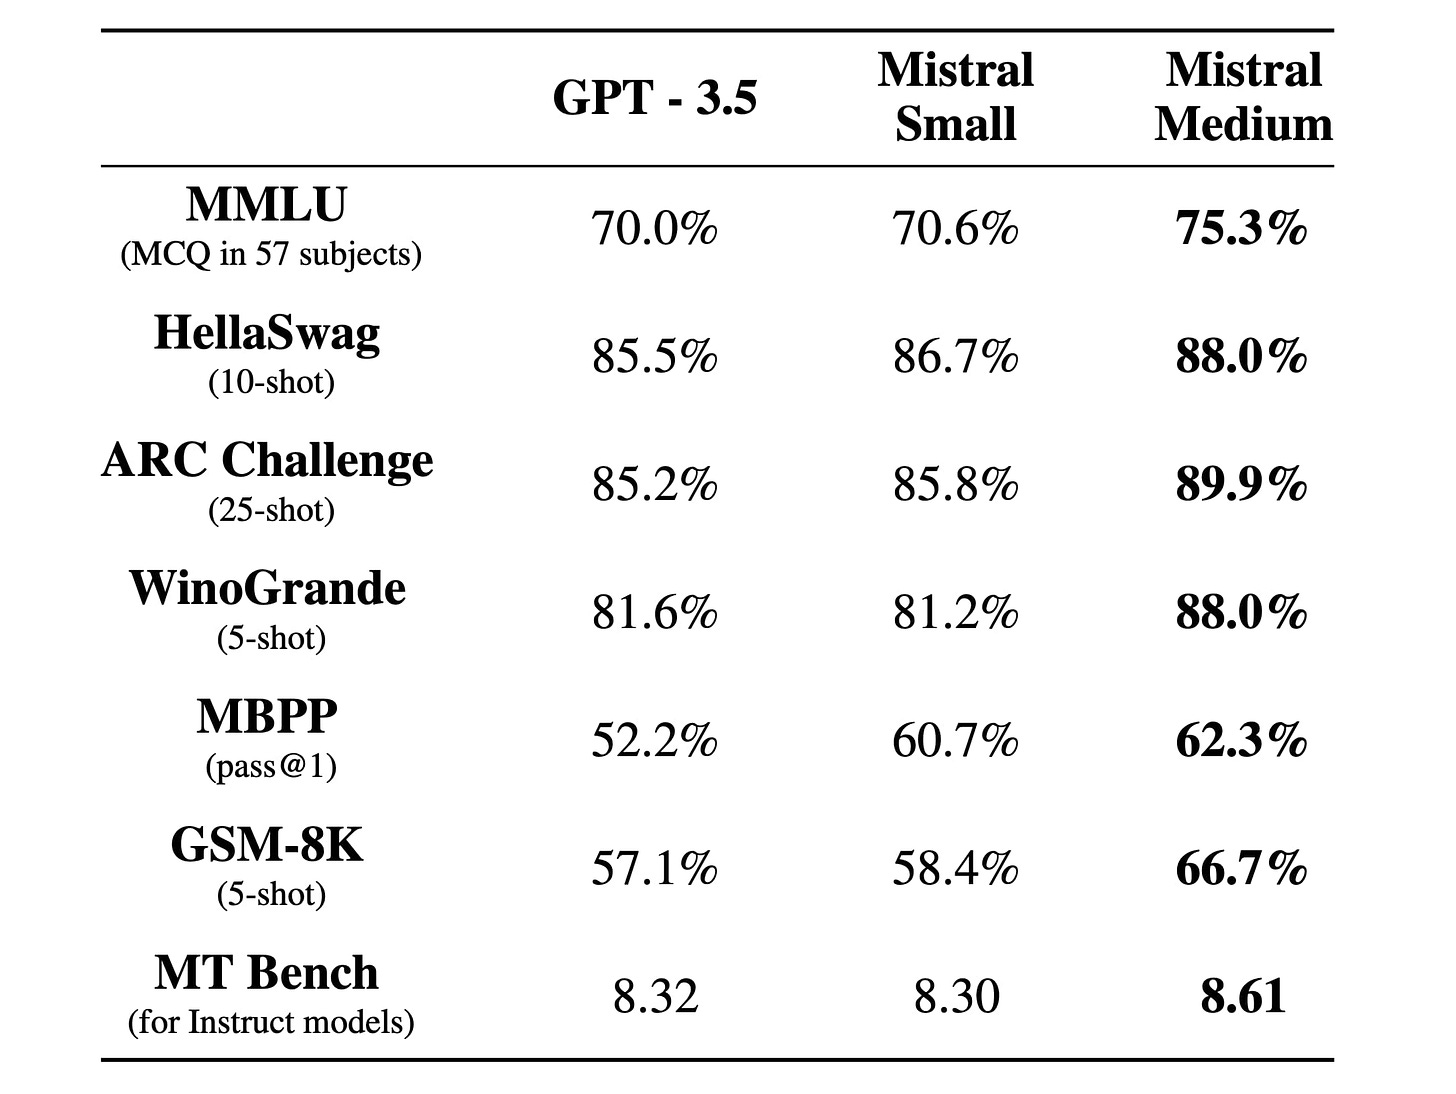 MMLU (MCQ in 57 subjects): GPT - 3.5 scored 70%, Mistral Small scored 70.6%, Mistral Medium scored 75.3%. HellaSwag (10-shot): GPT - 3.5 scored 85.5%, Mistral Small scored 86.7%, Mistral Medium scored 88%. ARC Challenge (25-shot): GPT - 3.5 scored 85.2%, Mistral Small scored 85.8%, Mistral Medium scored 89.9%. WinoGrande (5-shot): GPT - 3.5 scored 81.6%, Mistral Small scored 81.2%, Mistral Medium scored 88%. MBPP (pass@1): GPT - 3.5 scored 52.2%, Mistral Small scored 60.7%, Mistral Medium scored 62.3%. GSM-8K (5-shot): GPT - 3.5 scored 57.1%, Mistral Small scored 58.4%, Mistral Medium scored 66.7%. MT Bench (for Instruct models): GPT - 3.5 scored 8.32, Mistral Small scored 8.30, Mistral Medium scored 8.61.